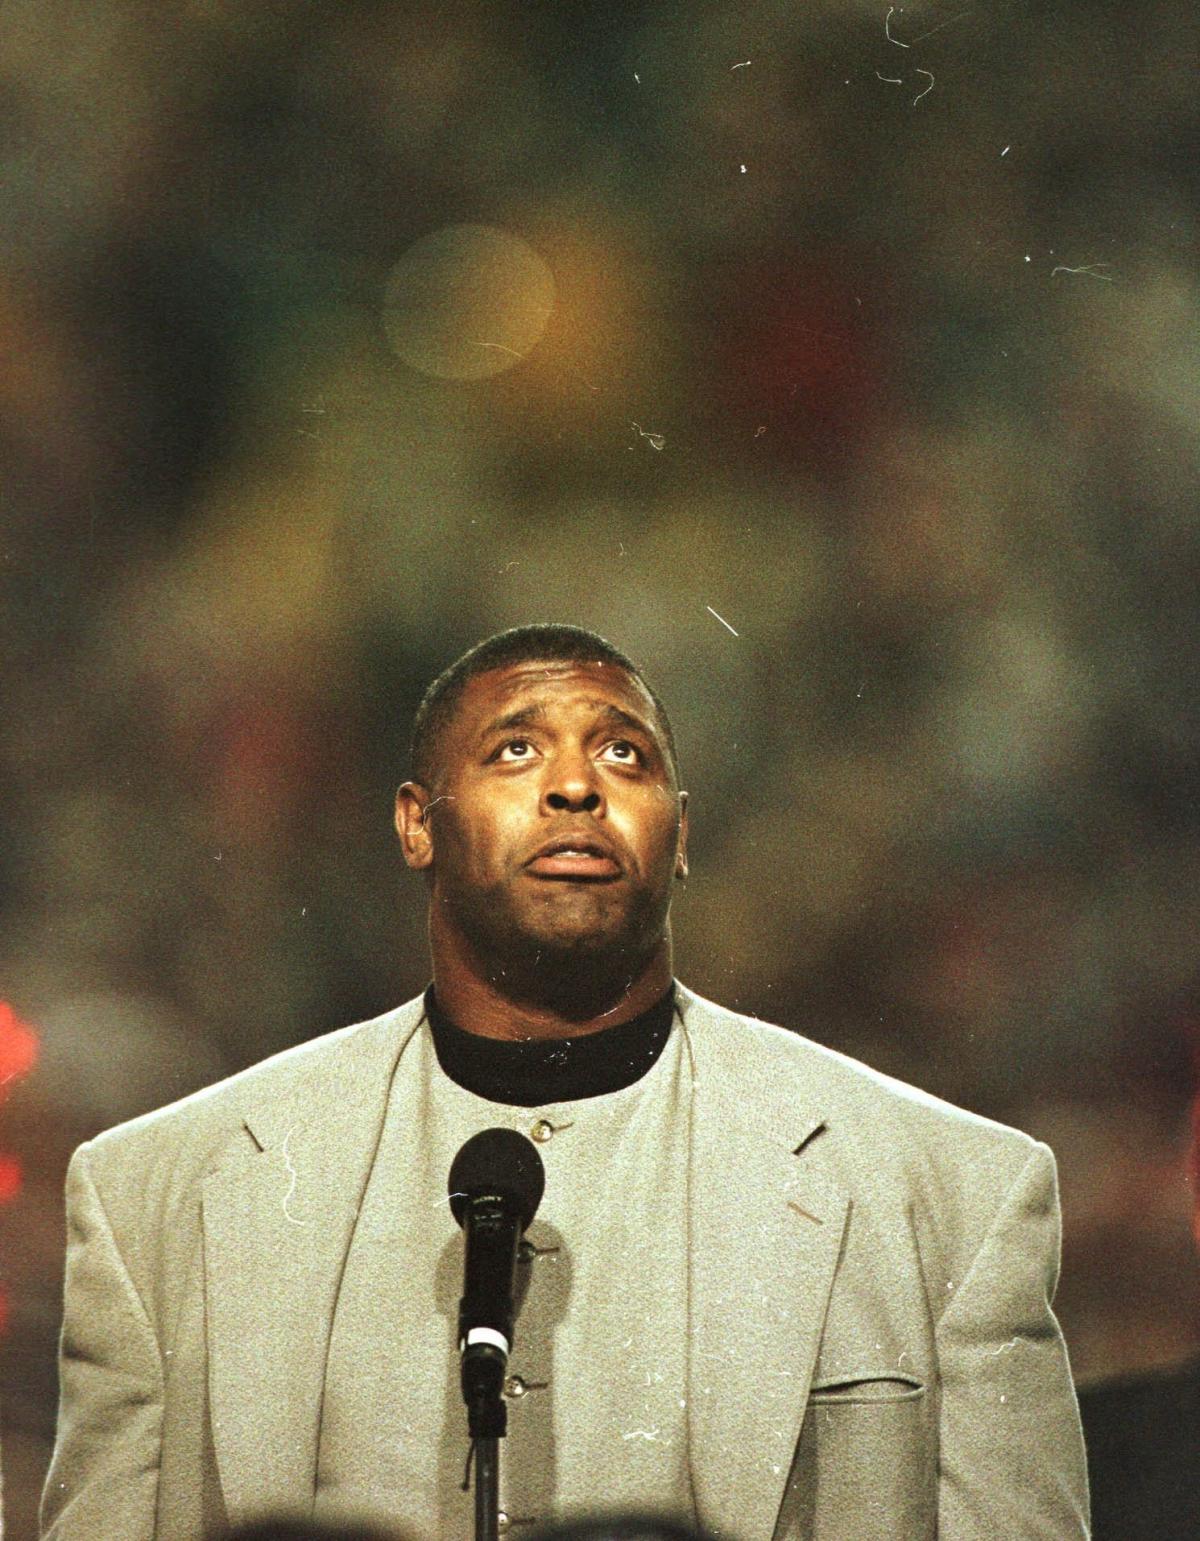 This was the original coverage of Reggie White's shocking death in 2004